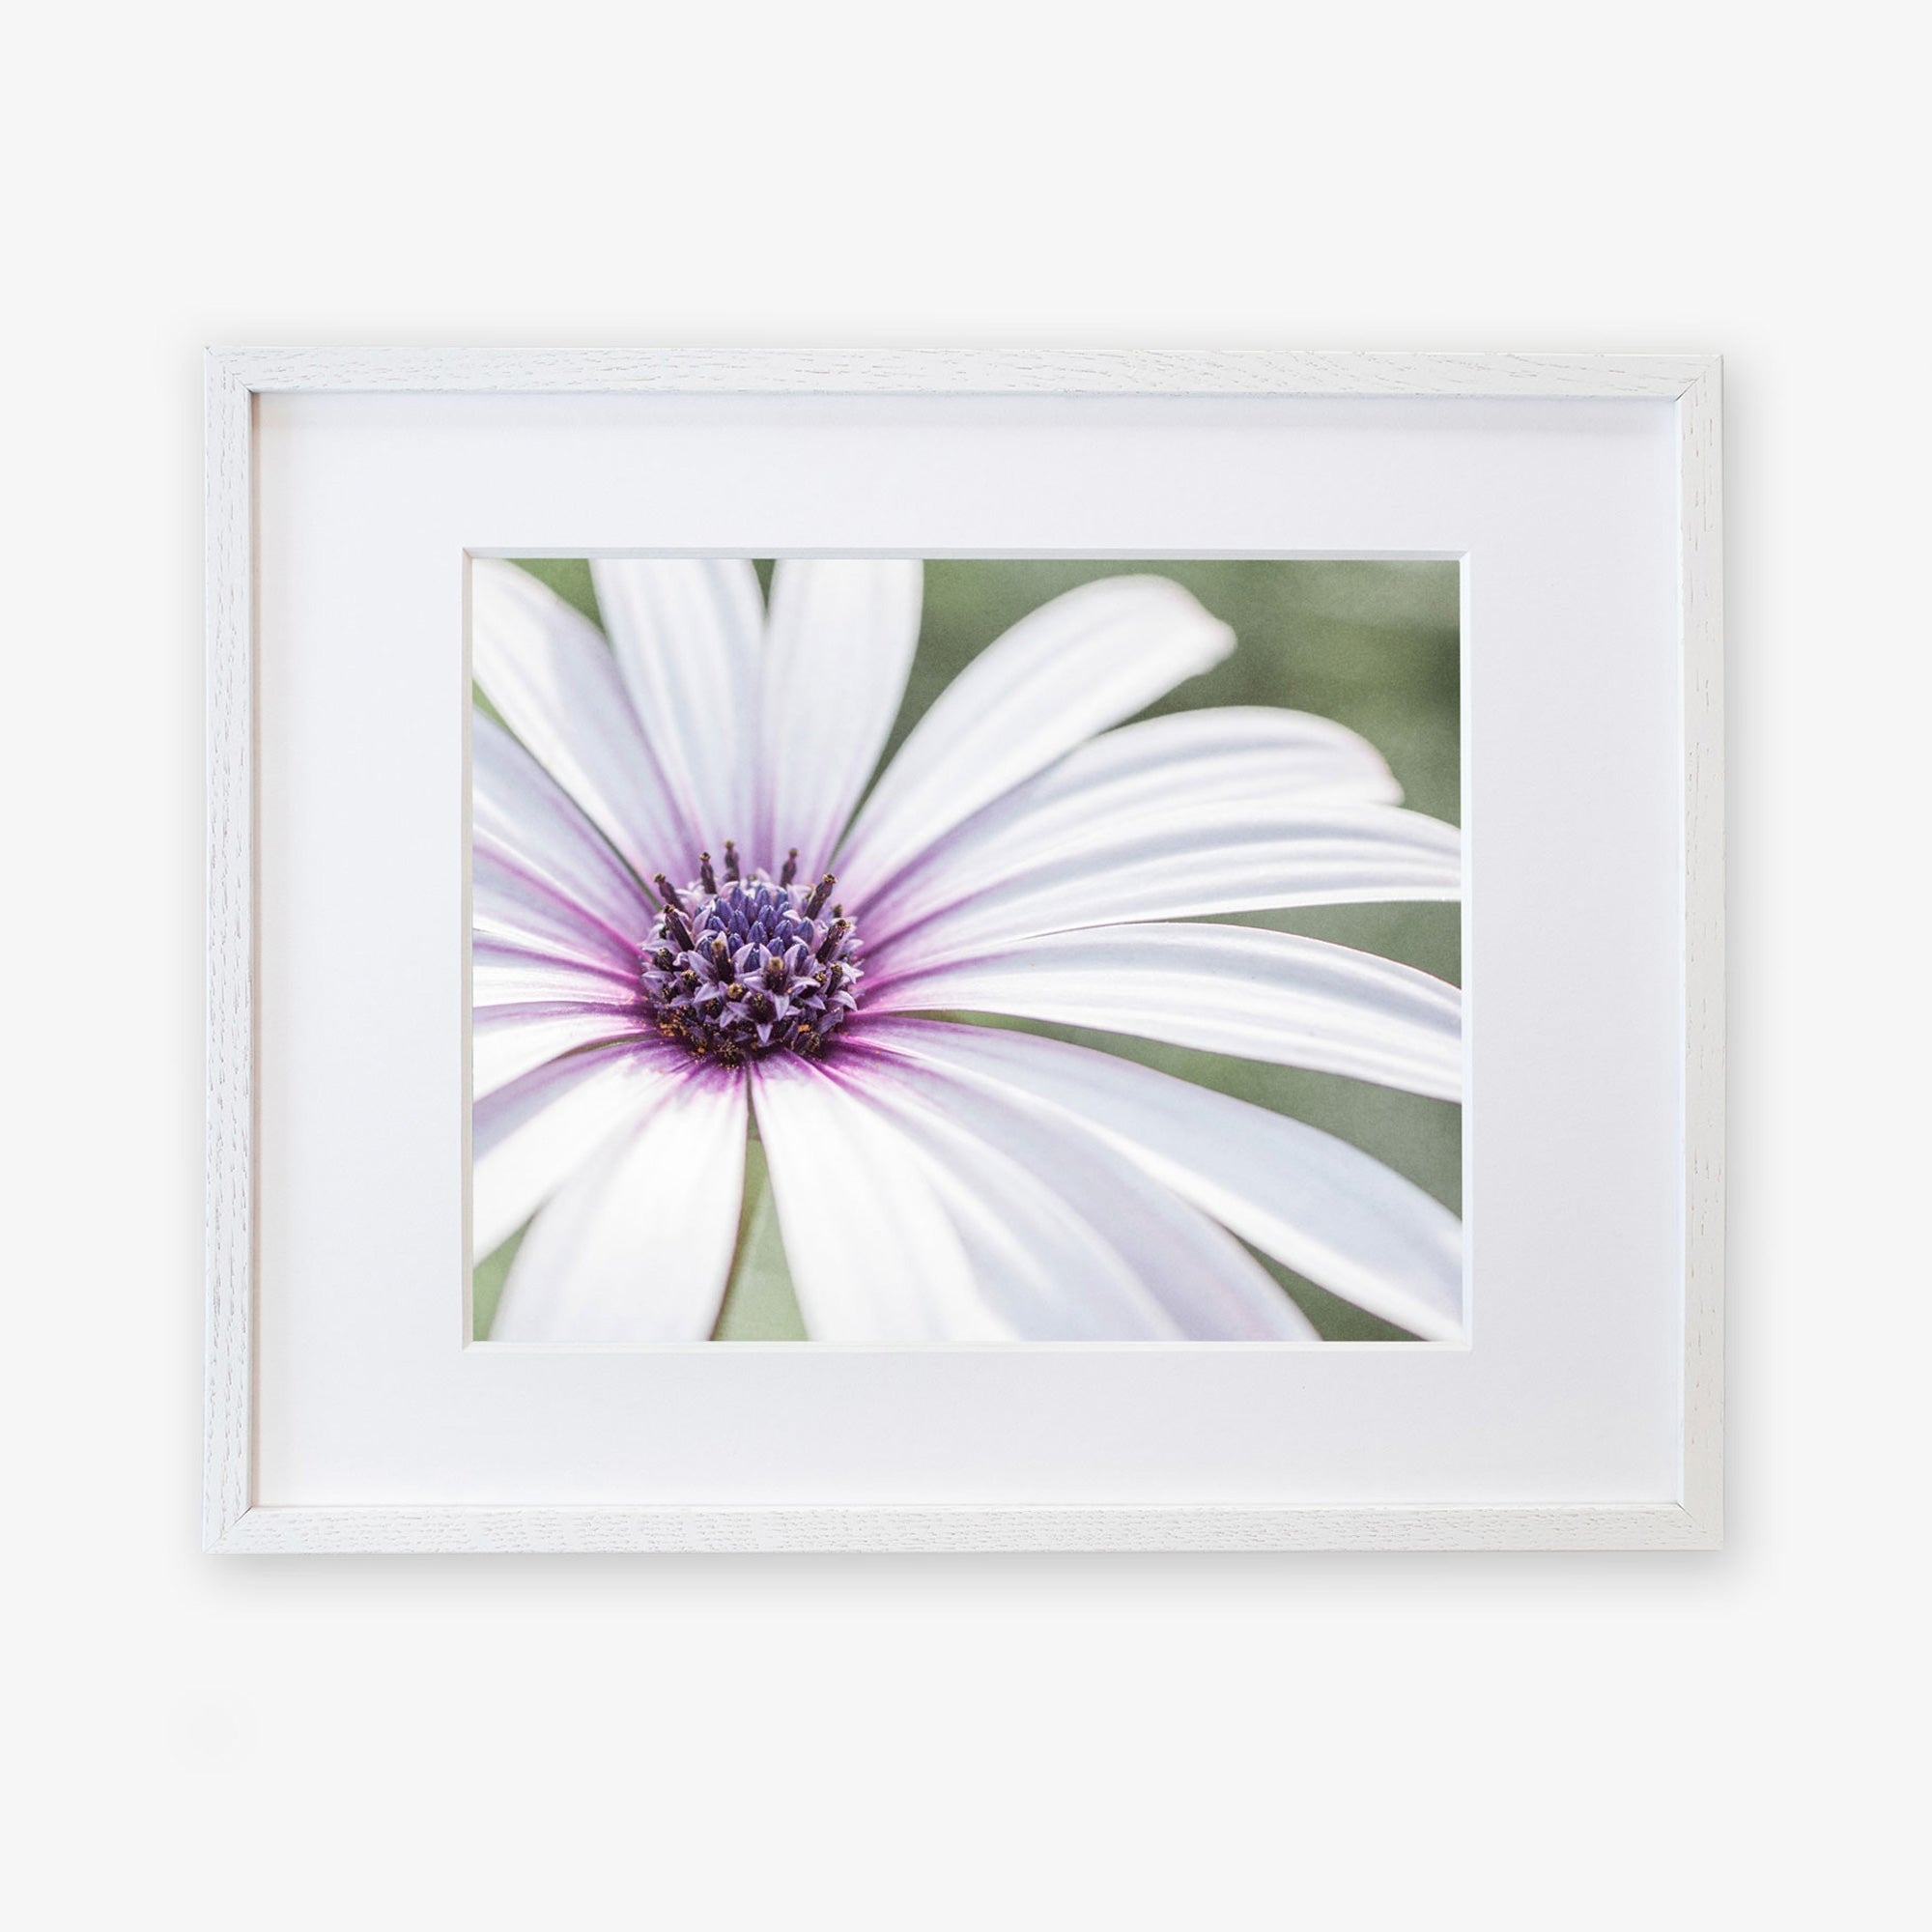 A close-up photo of a Large White Daisy Flower Print, &#39;Bed of Petals&#39; printed on archival photographic paper by Offley Green, highlighting its delicate petals and vibrant central cluster.